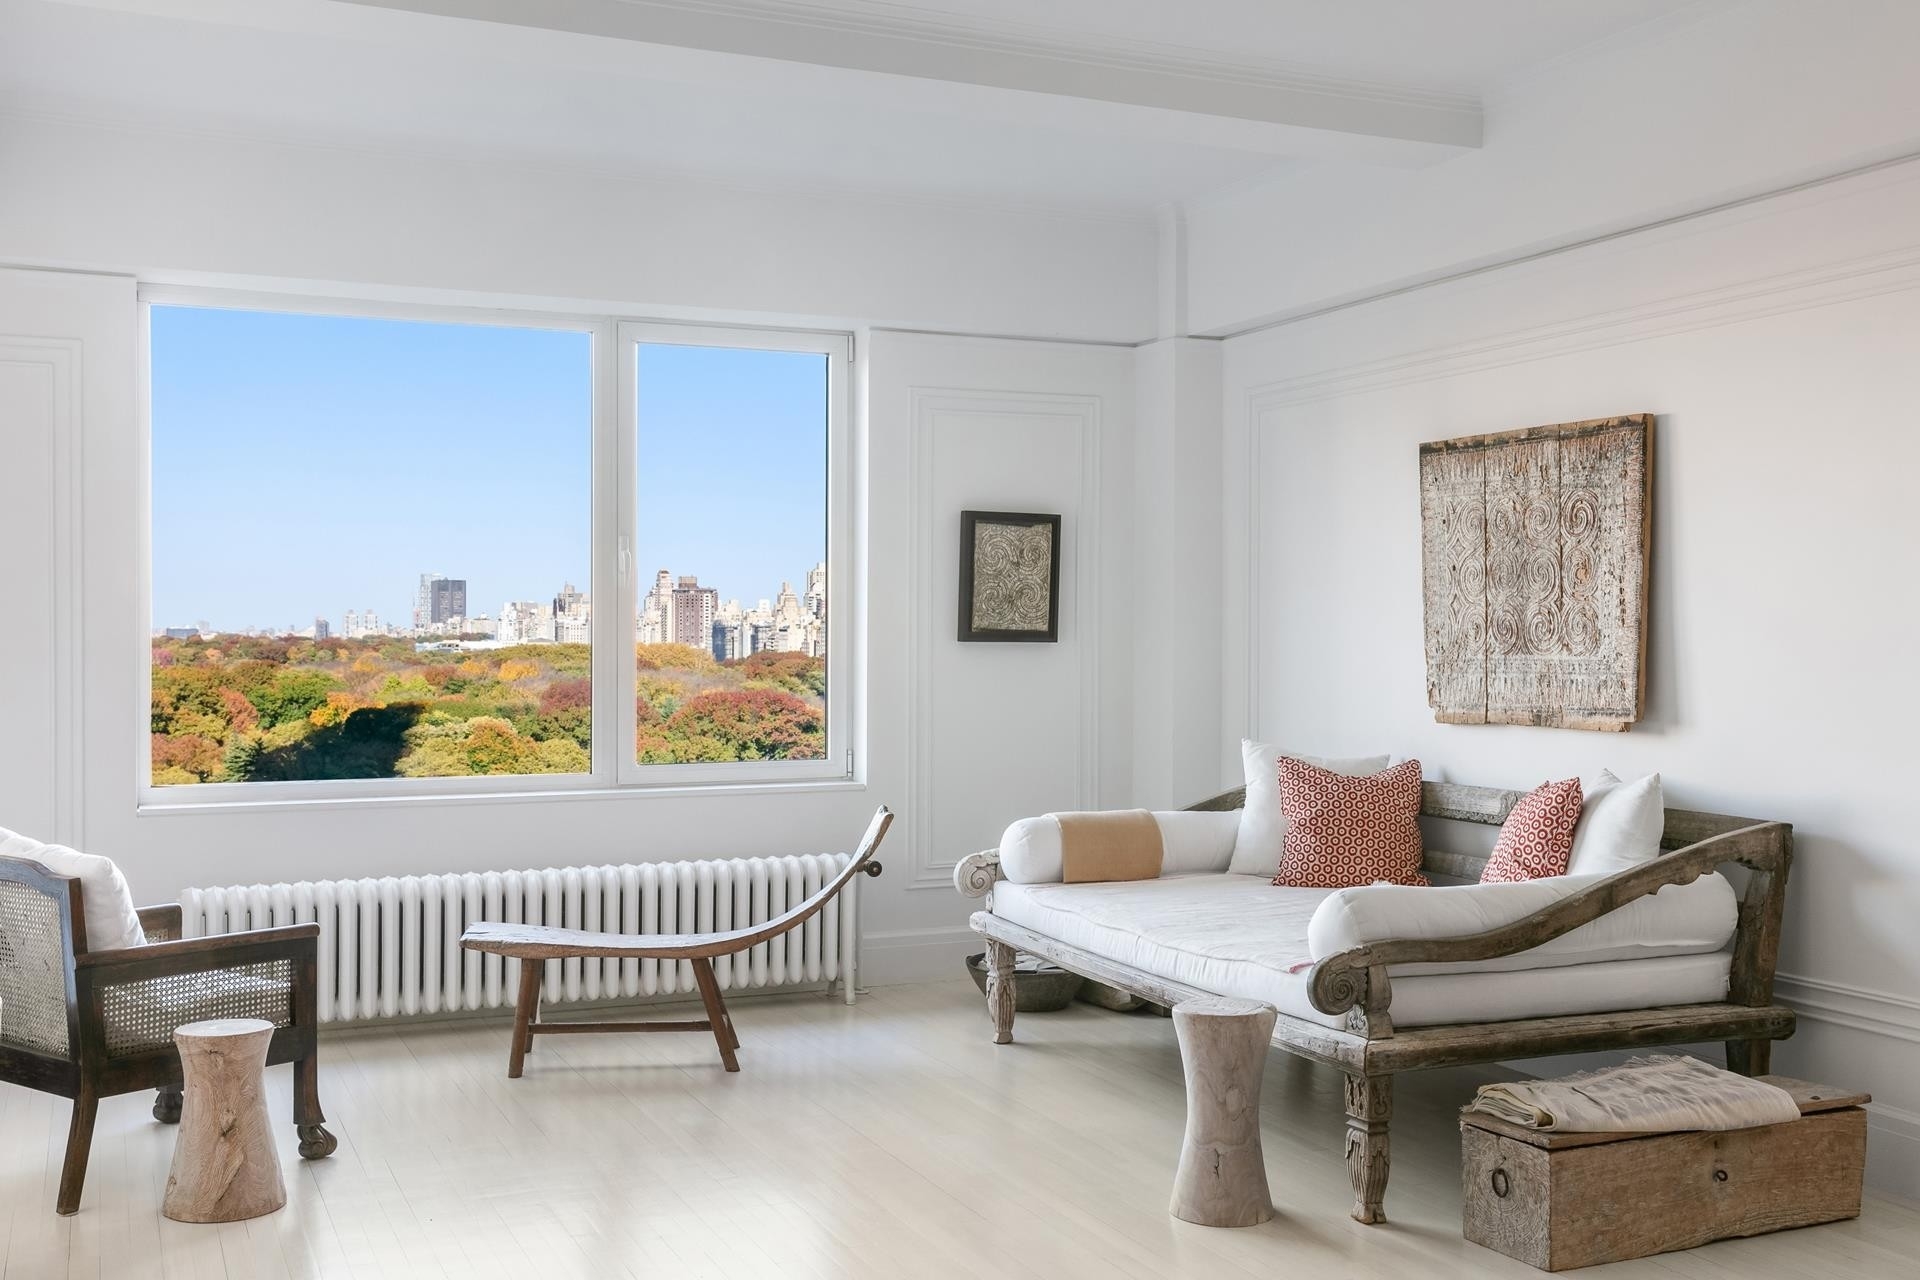 Co-op Properties for Sale at 128 CENTRAL PARK S, 15A Central Park South, New York, NY 10019